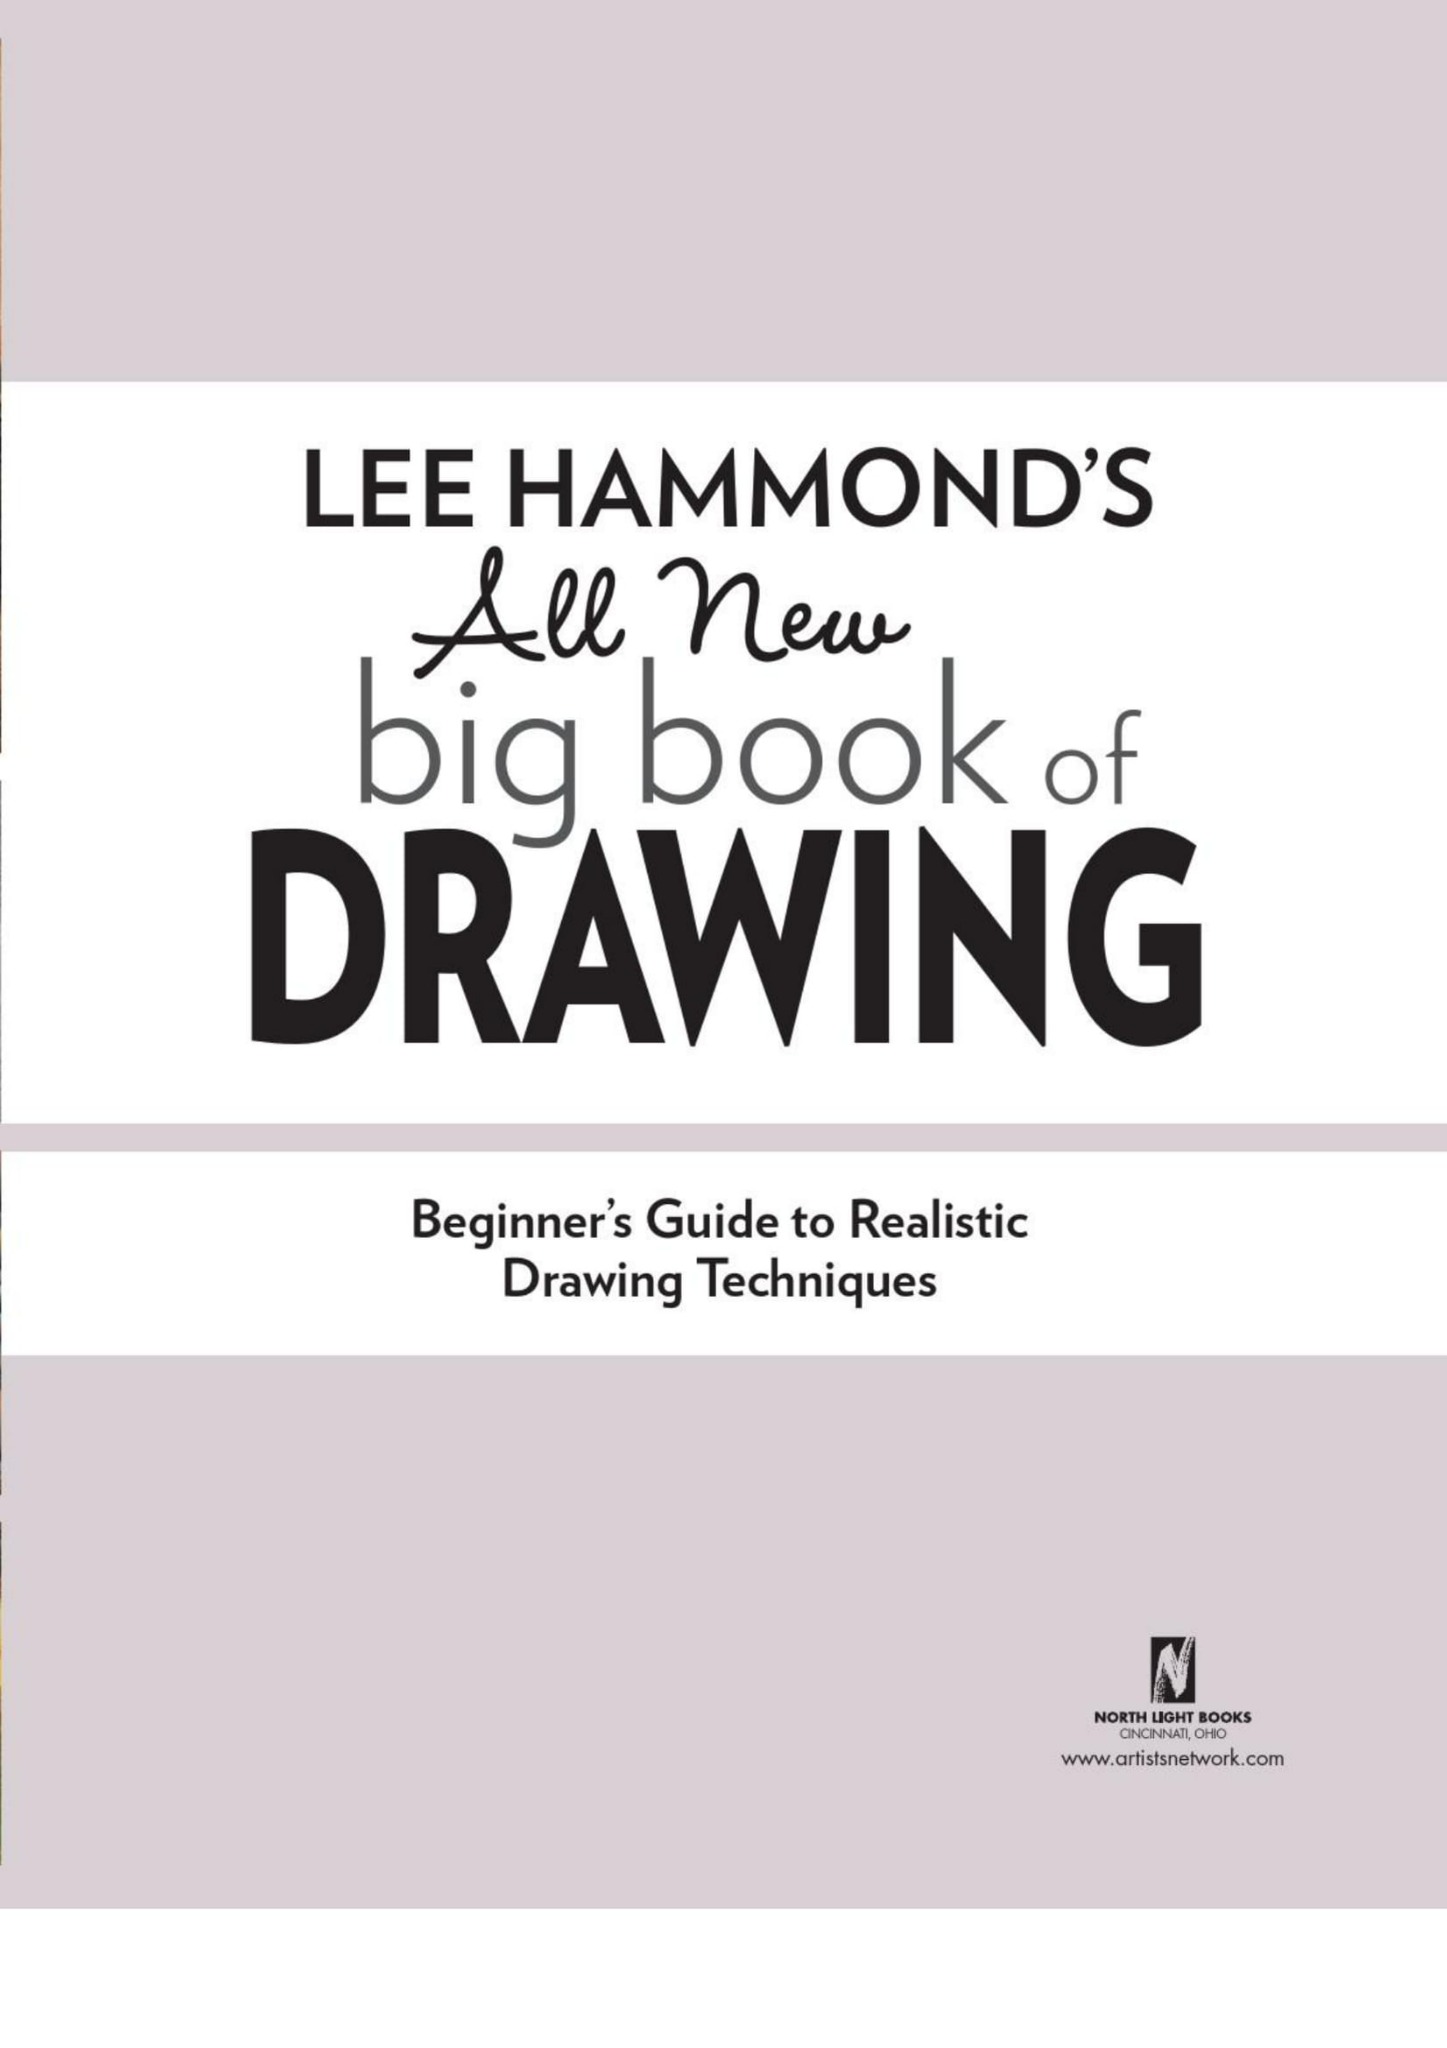 https://product.hstatic.net/200000239353/product/lee_hammond_s_all_new_big_book_of_drawing-4_d4f73889515047c29310a01ad48285f2.jpg